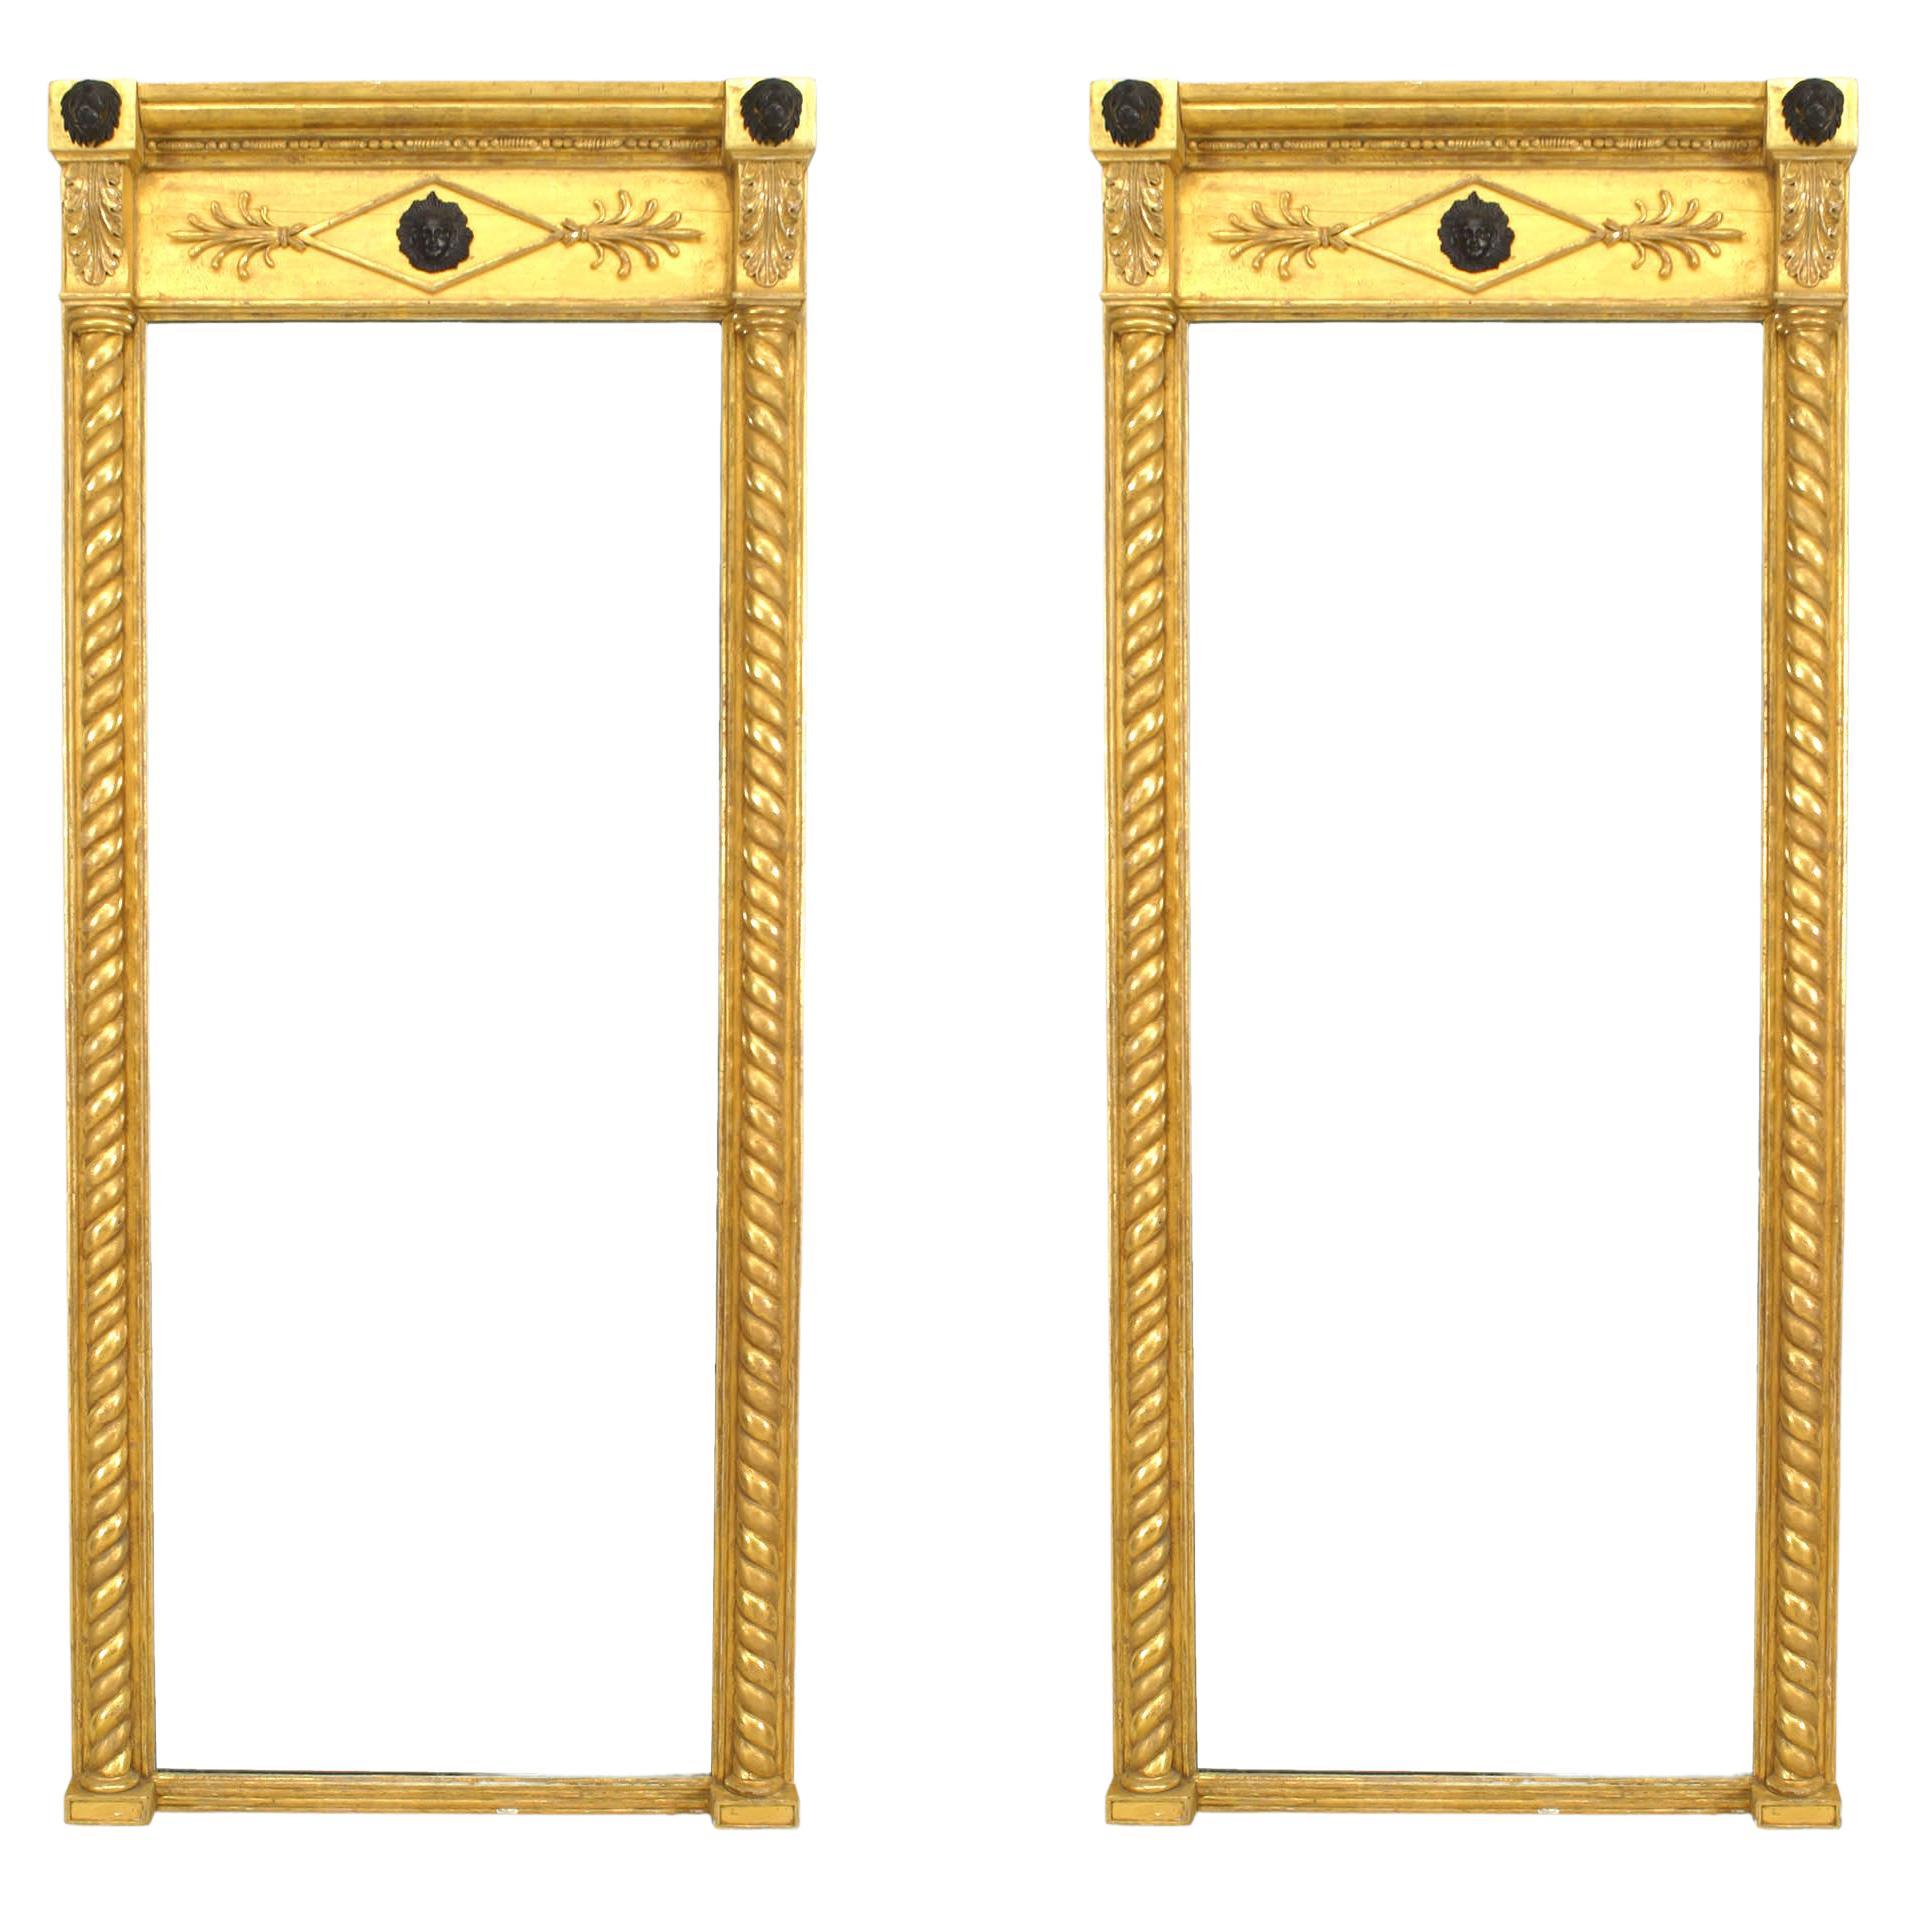 Pair of English Regency Gilt Mask and Lion Cornice Wall Mirrors